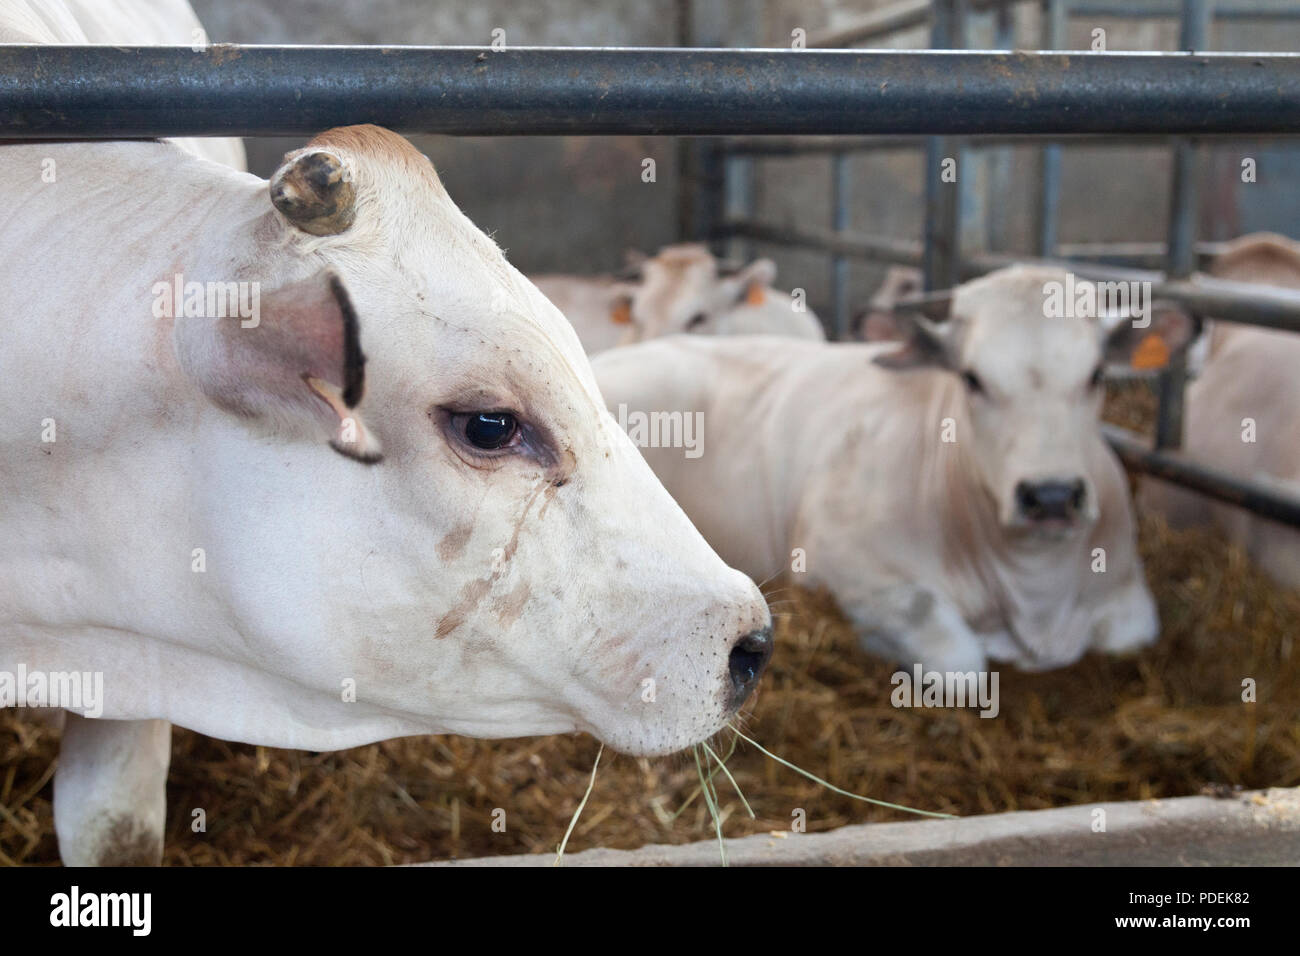 white cows inside barn on organic farm in italy Stock Photo